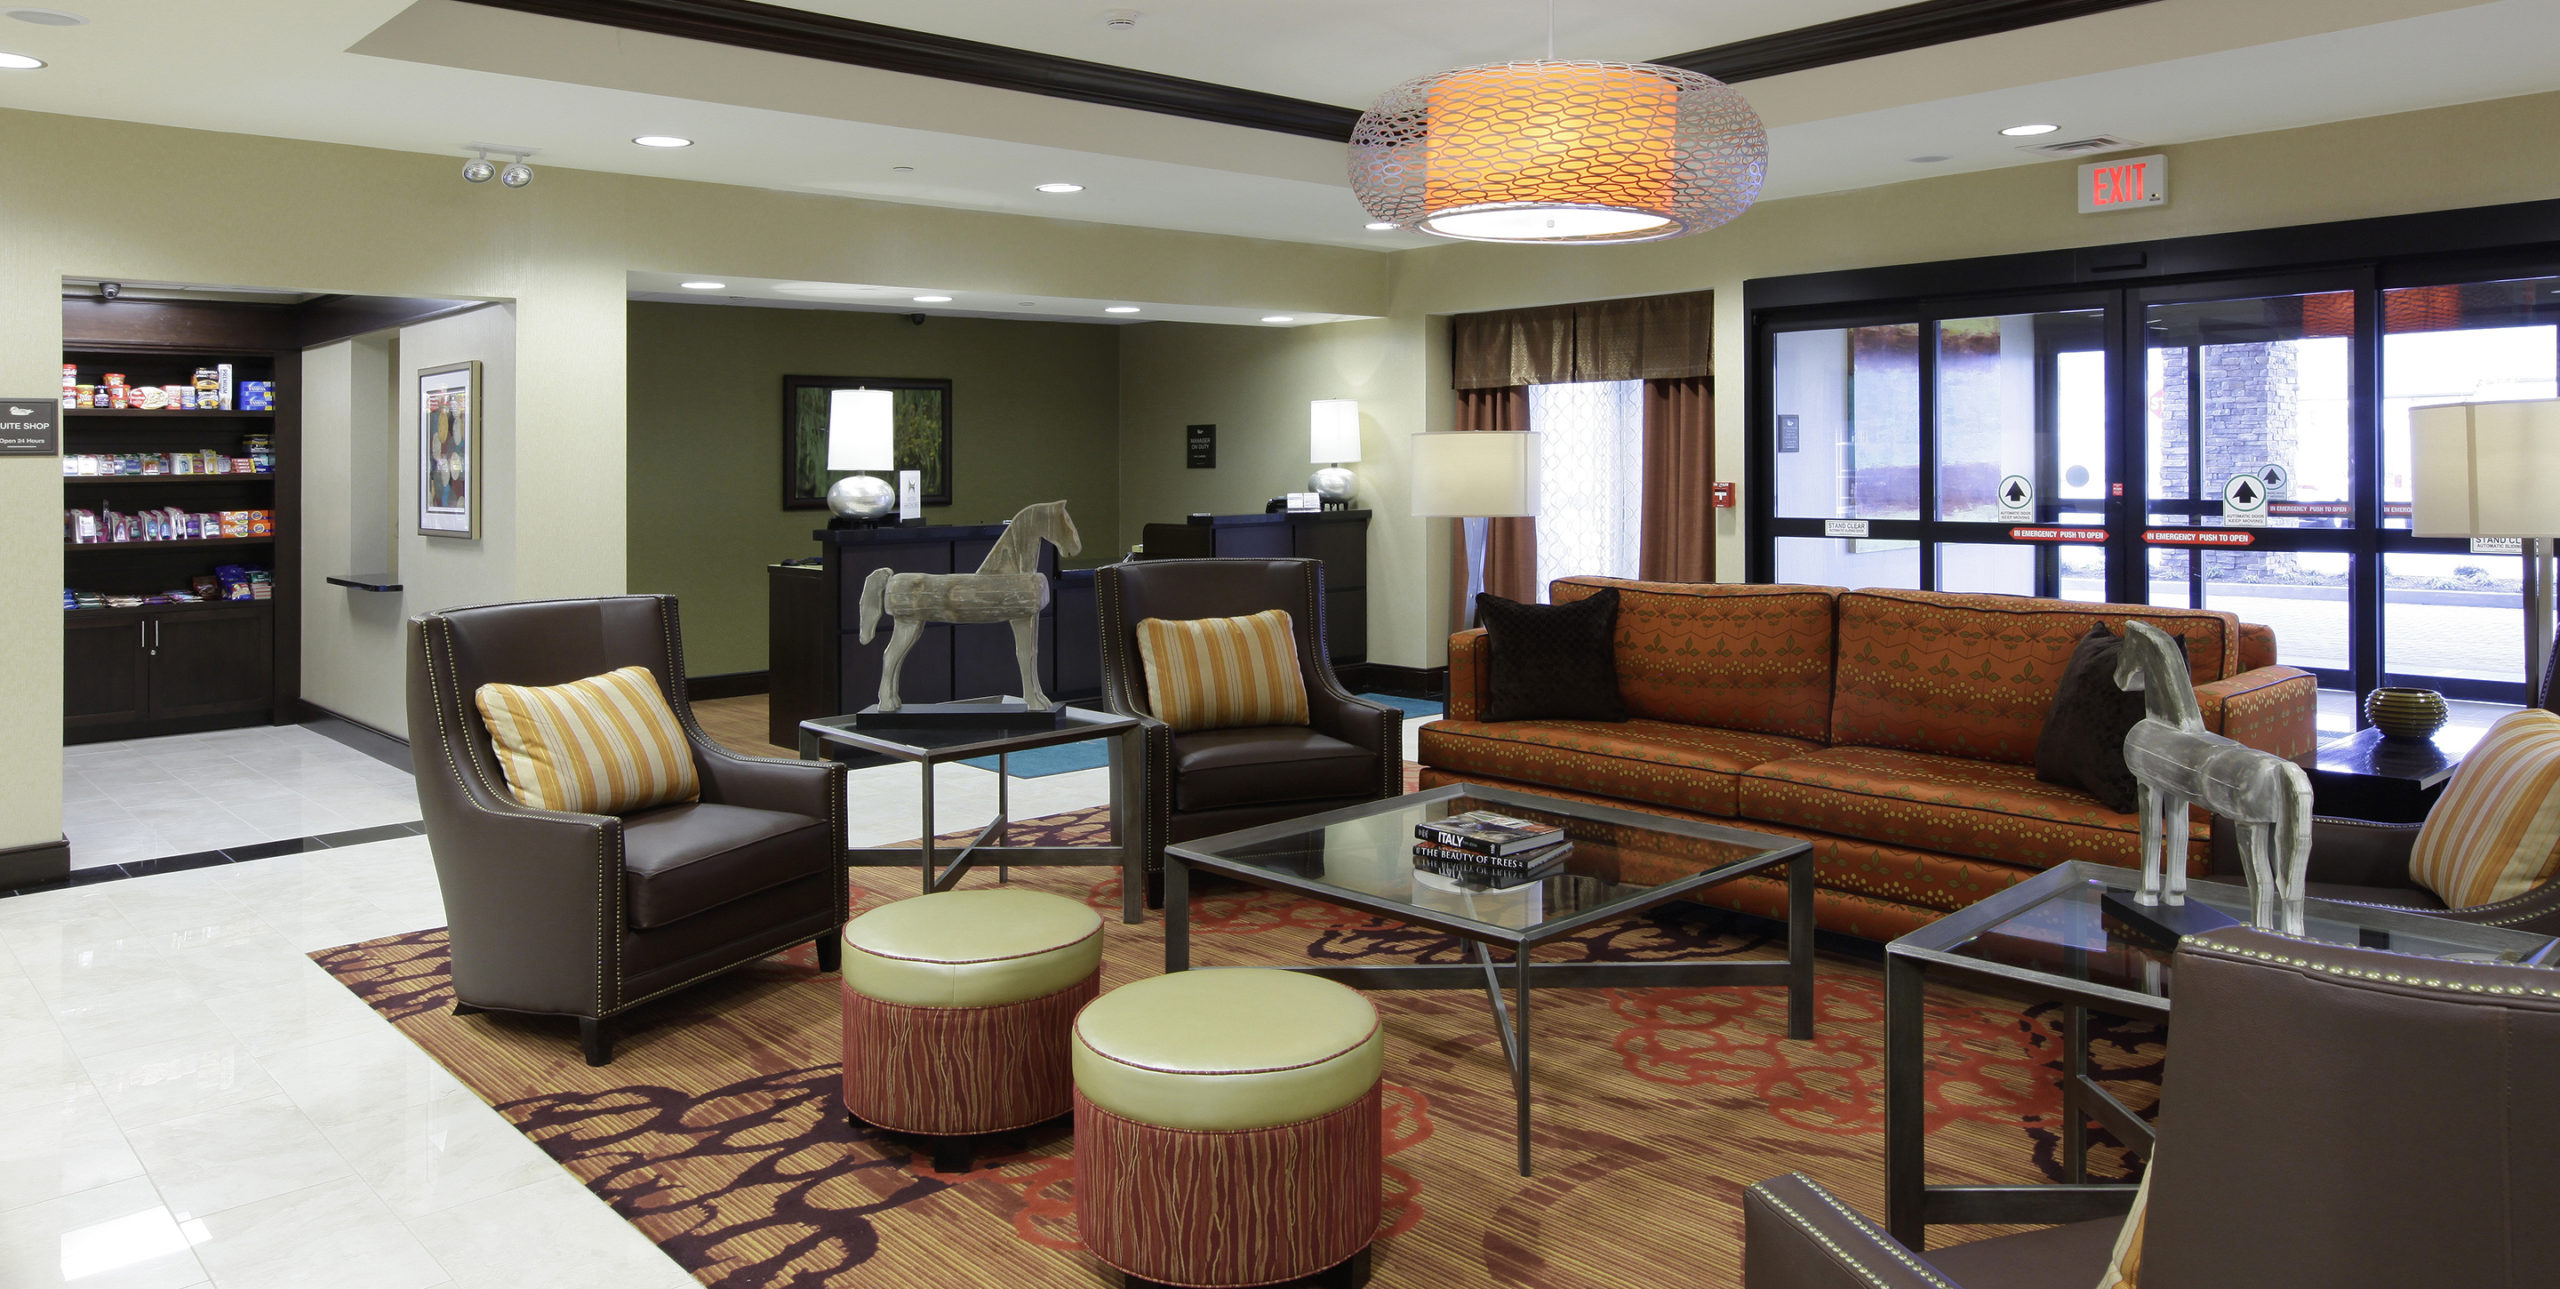 Lobby seating of a couch, chairs, and stools at Homewood Suites in Carle Place